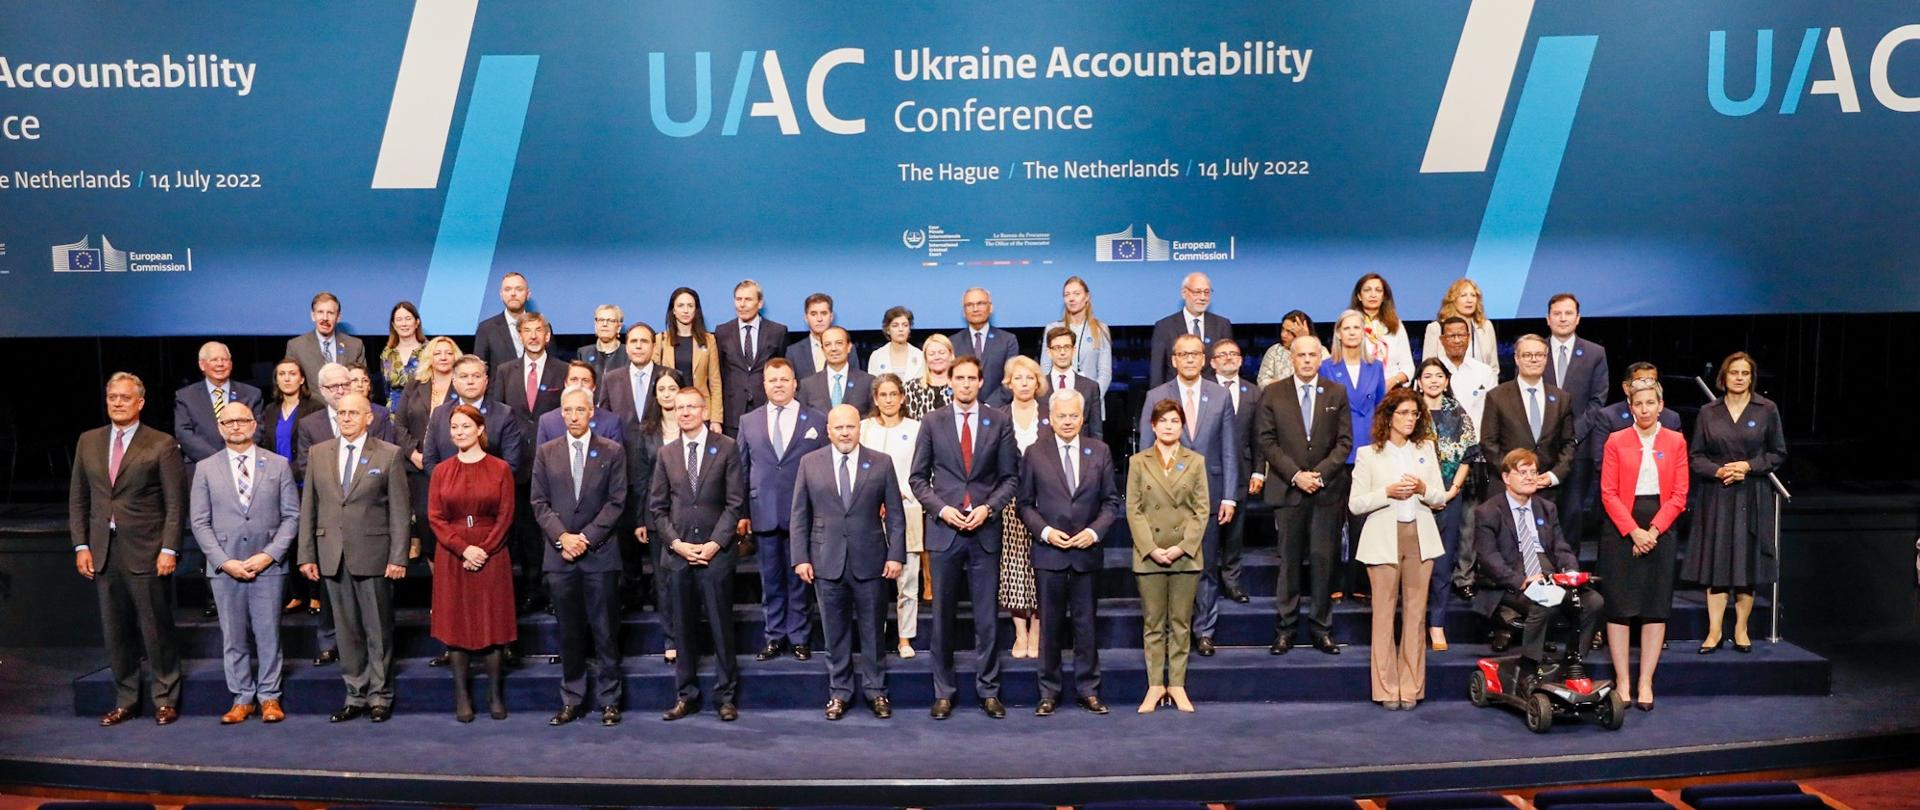 Accountability for Ukraine – Enhancing coordination of action to deliver justice in The Hague.